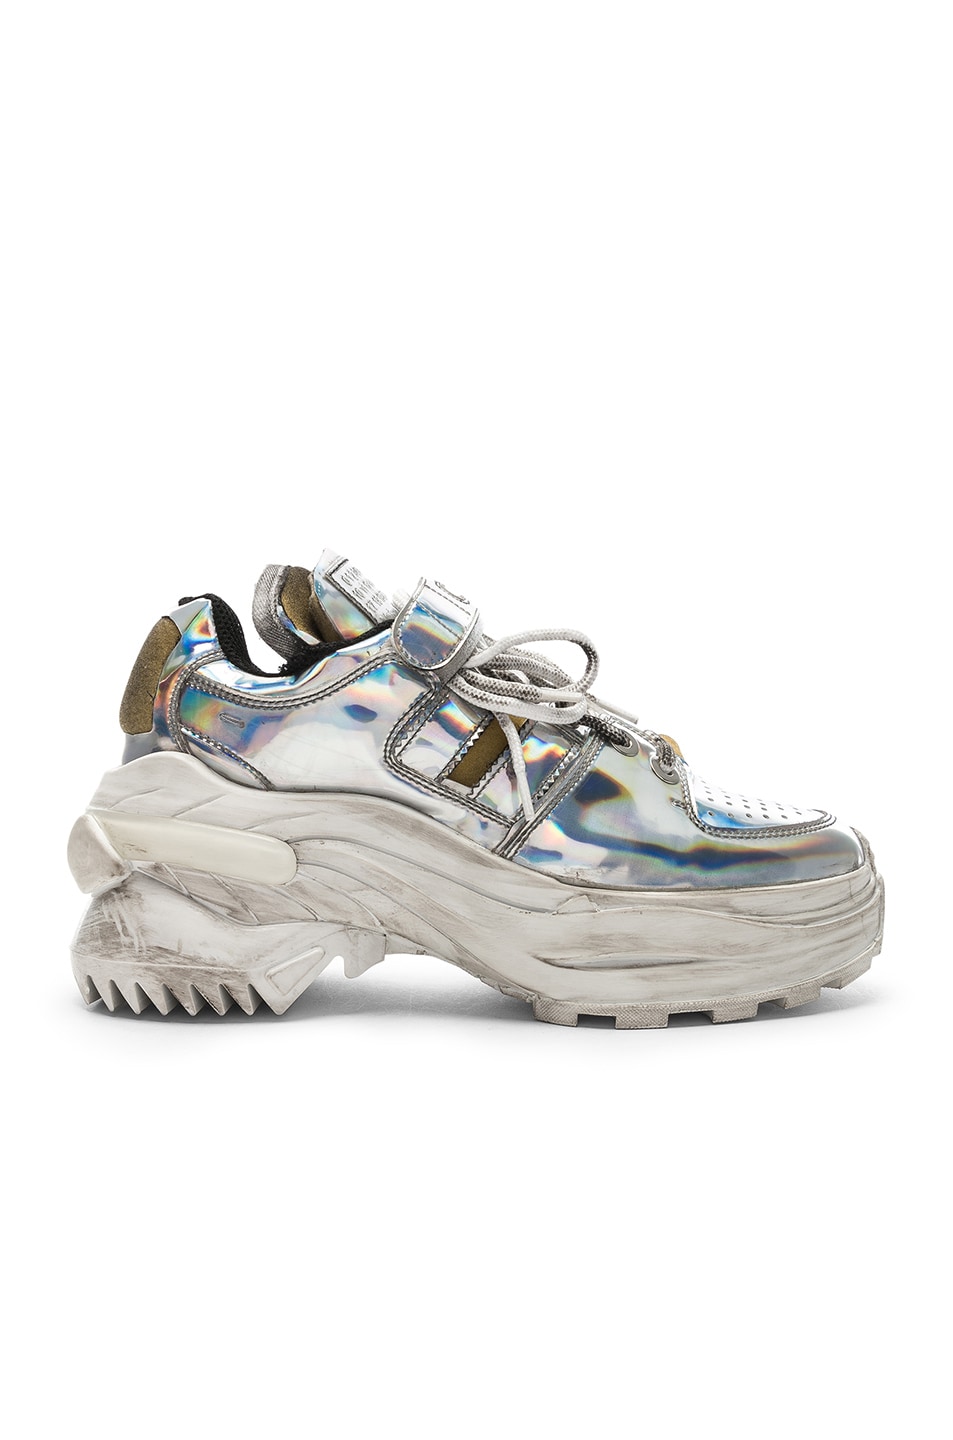 Maison Margiela Holographic Sneakers in America Silver | FWRD